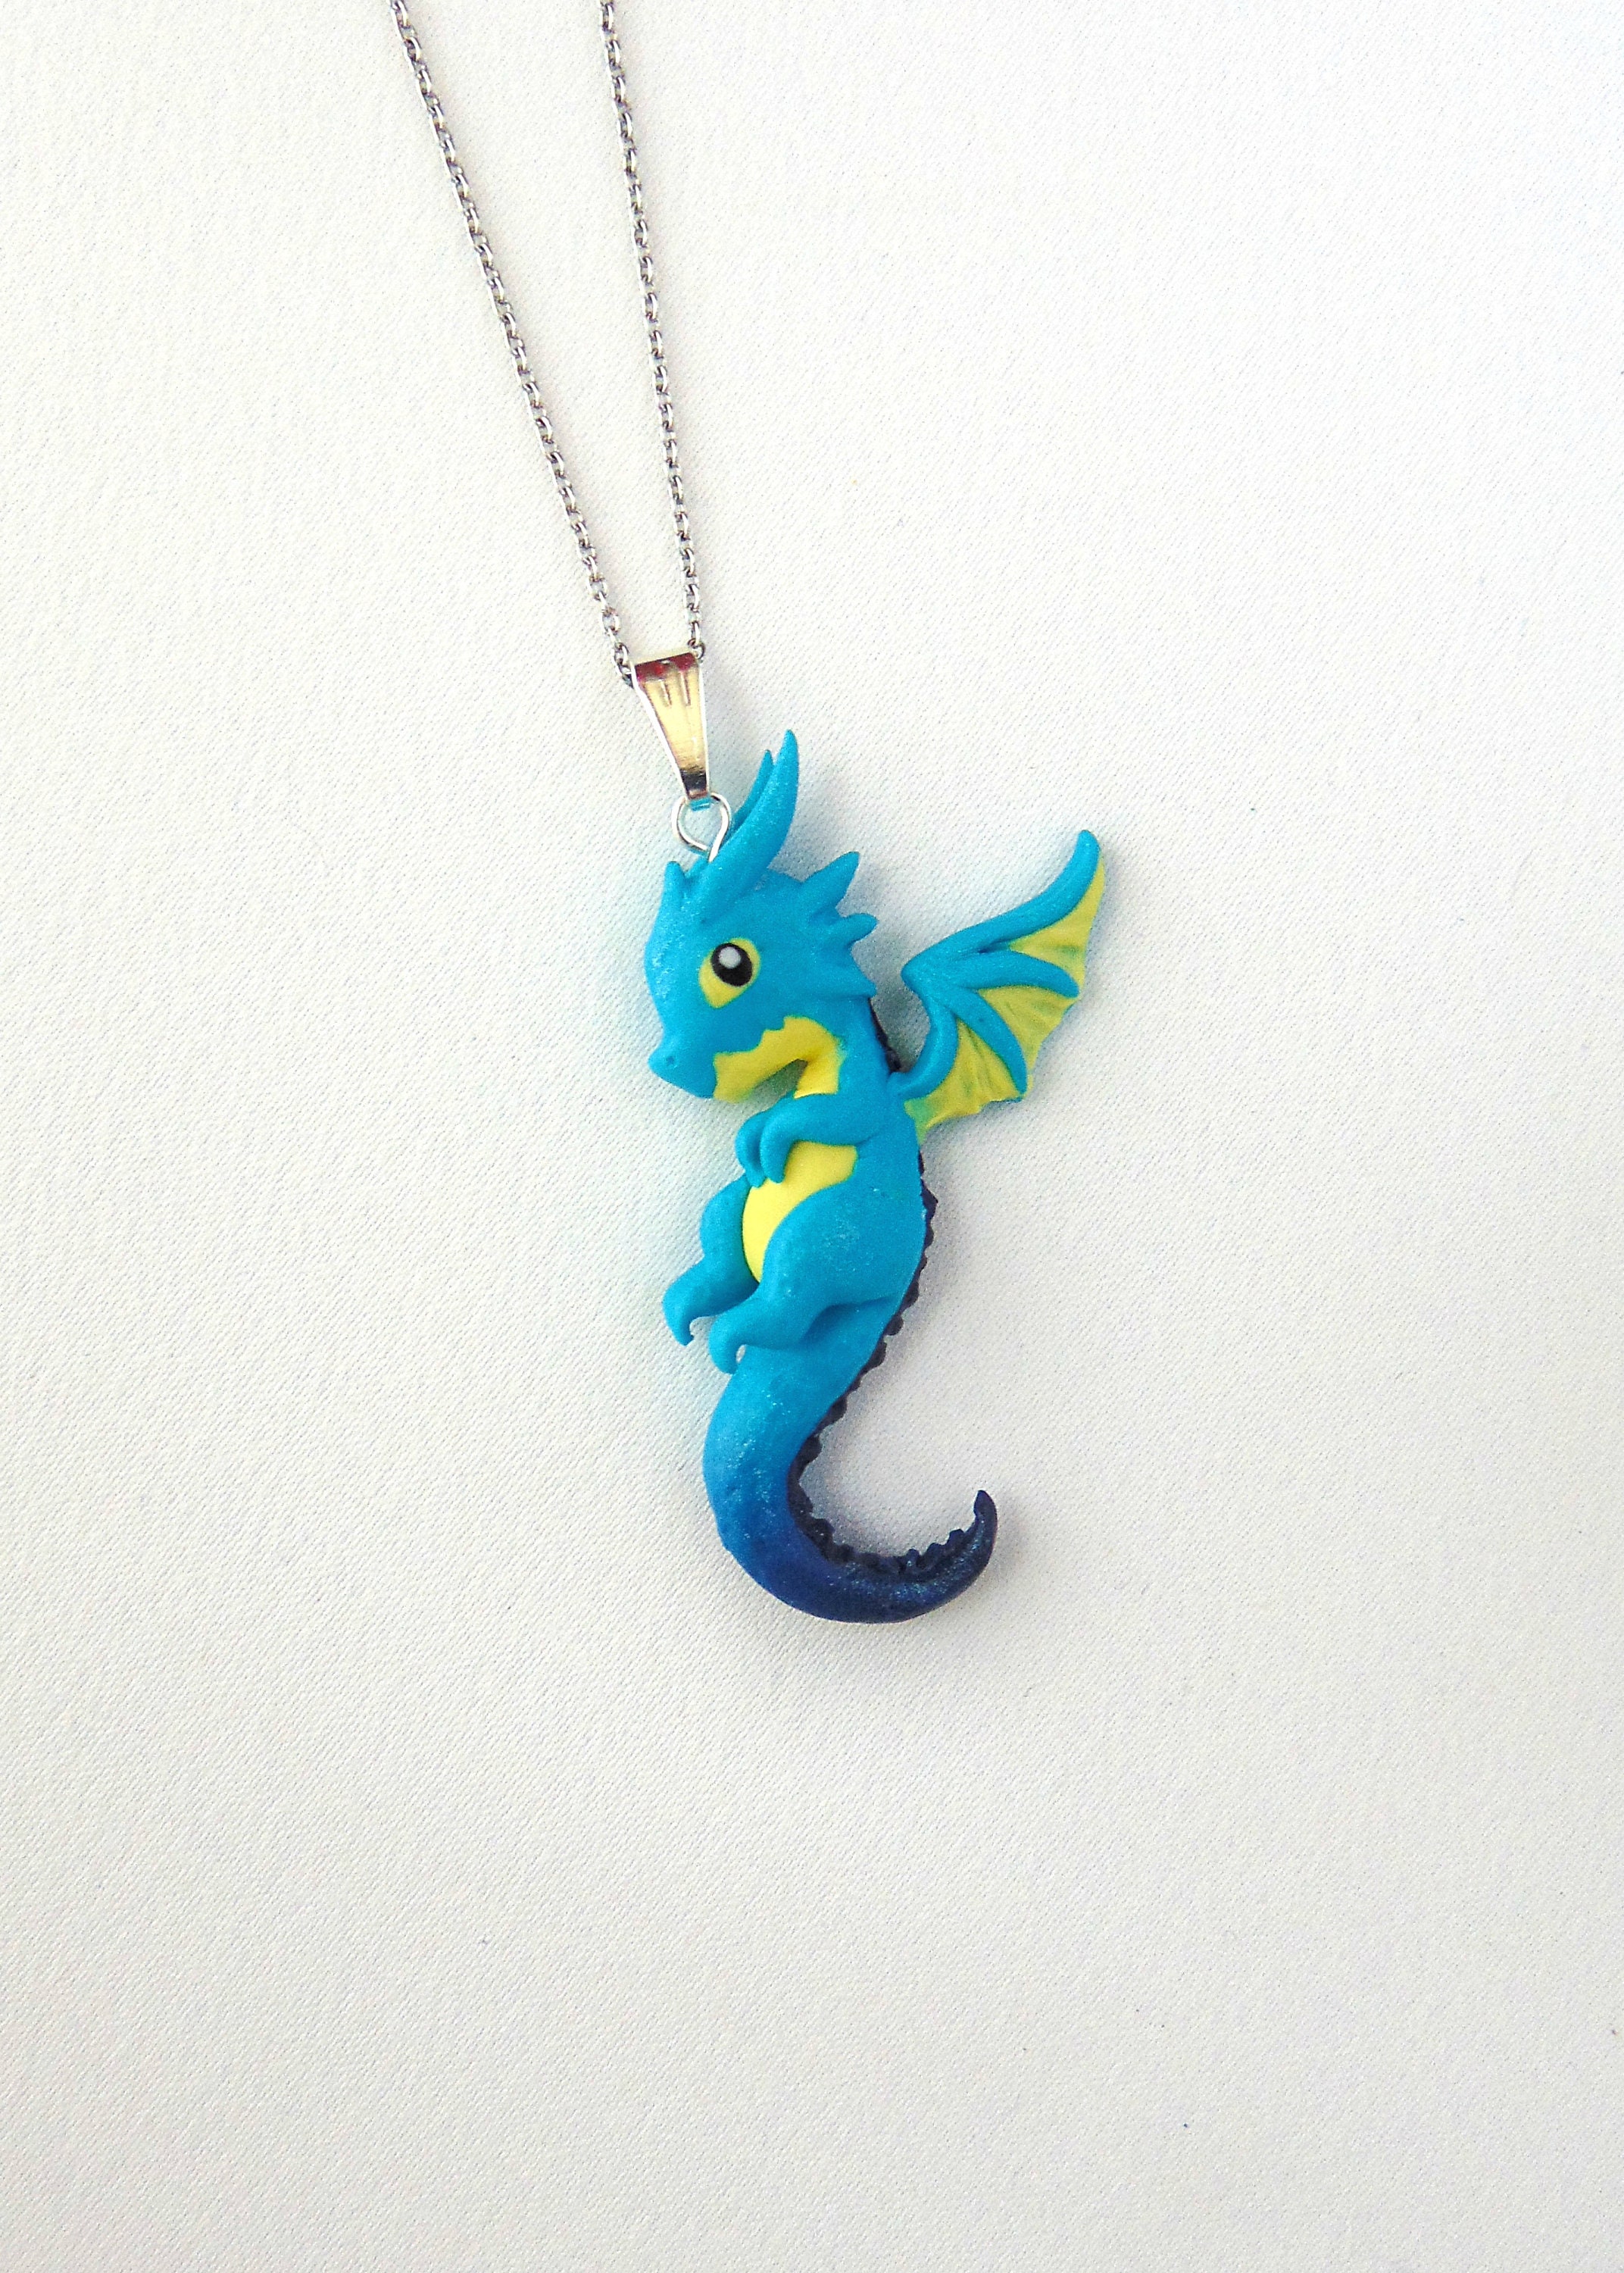 Whimsical Dragon Sitting on Gemstone, Fun, Mystical, Interesting, Gifts for Her, Handmade Jewelry, Polymer Clay Necklace , Everyday Jewelry